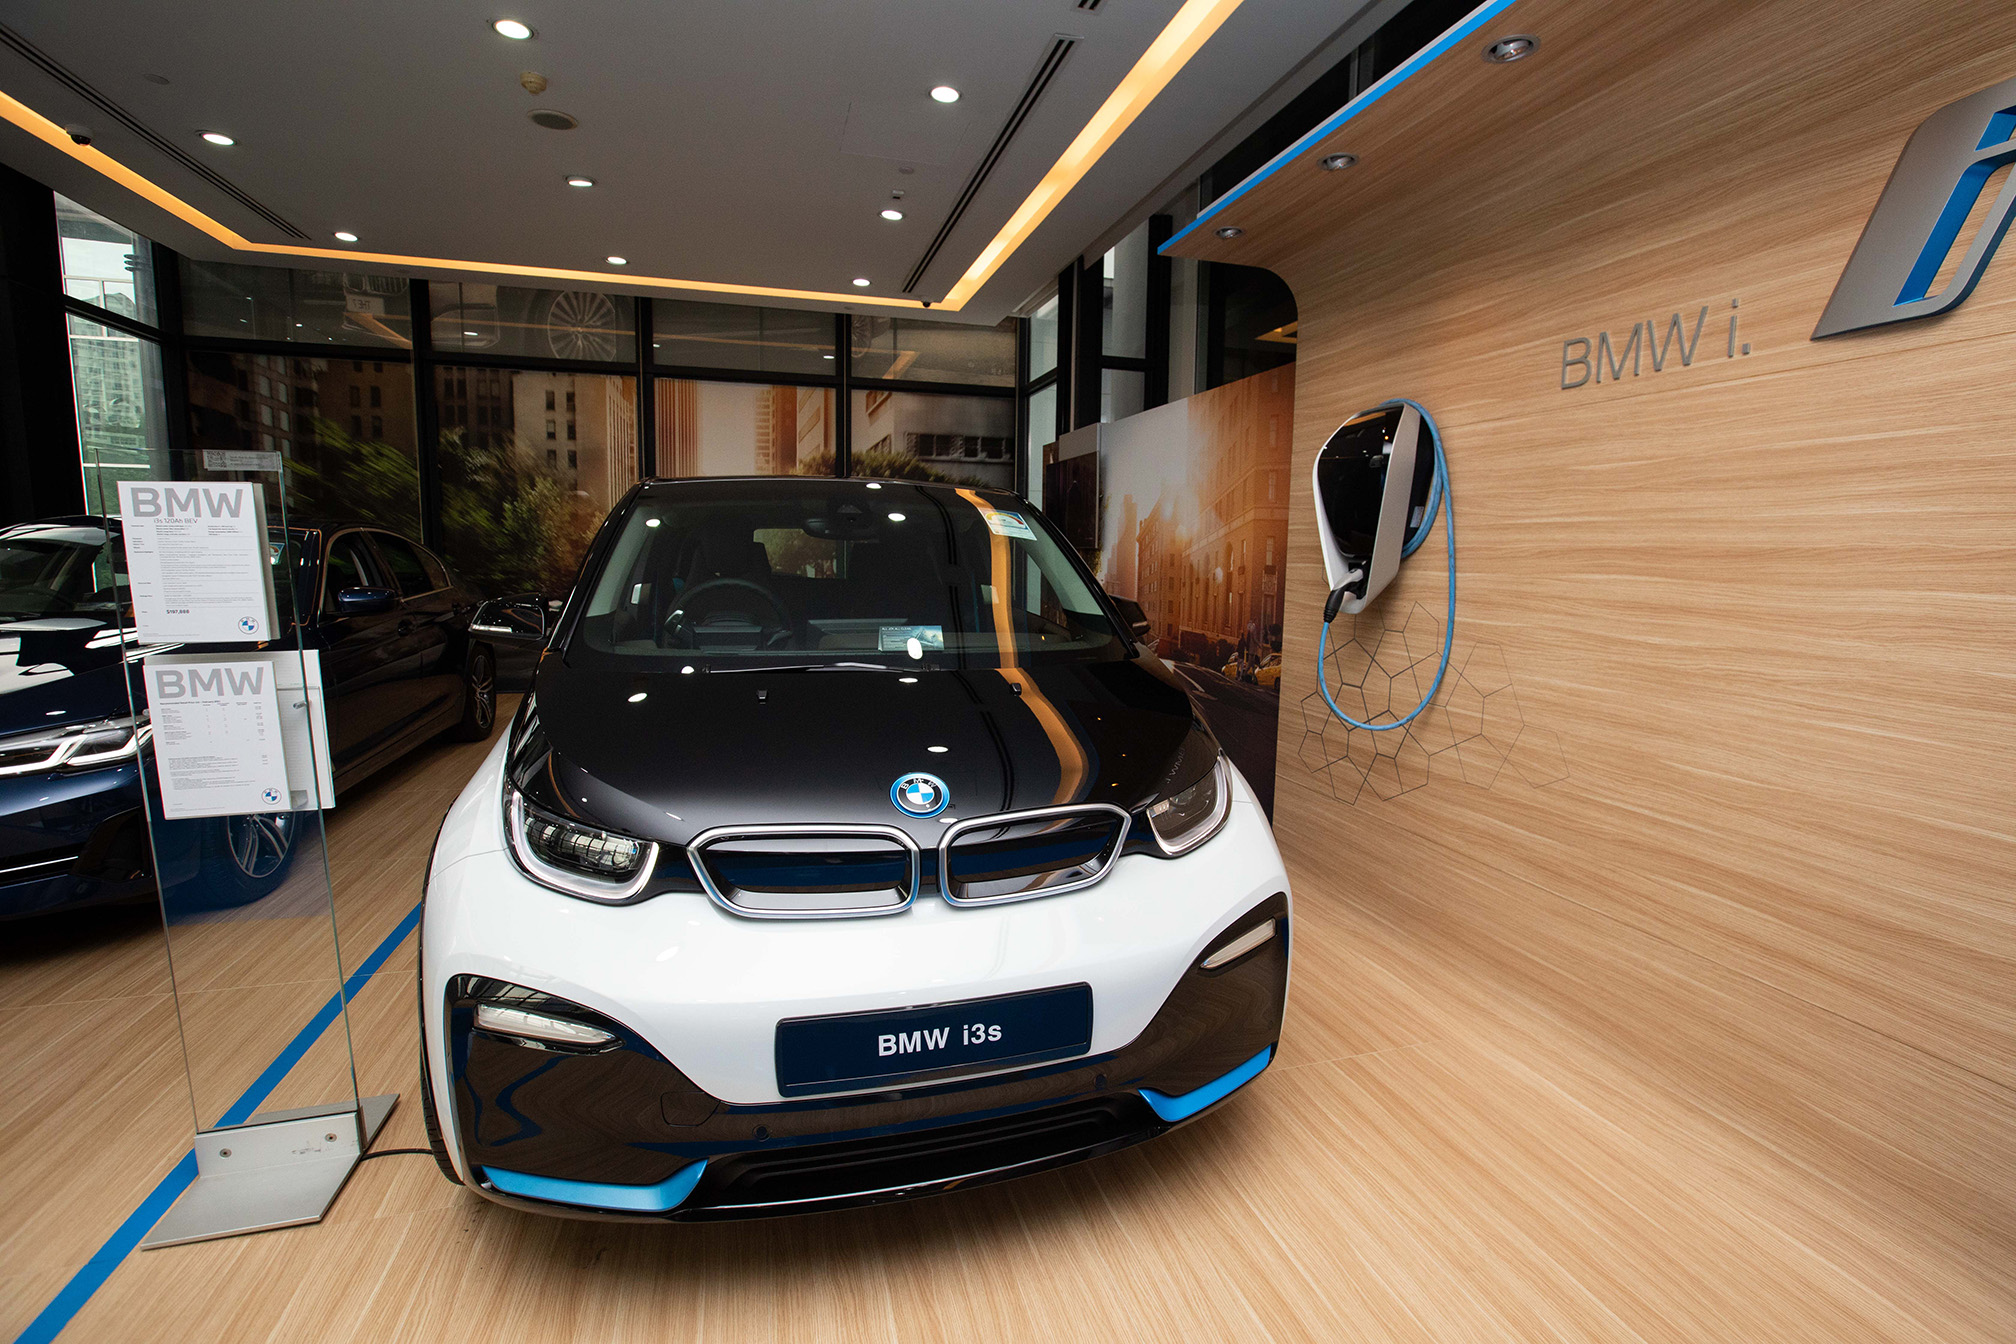 A BMW i3s electric vehicle displayed in a showroom. The case for EVs had only strengthened over the past decade, with energy and transport experts pointing out that the cost of batteries has been falling rapidly to a point where mass market EVs will be co